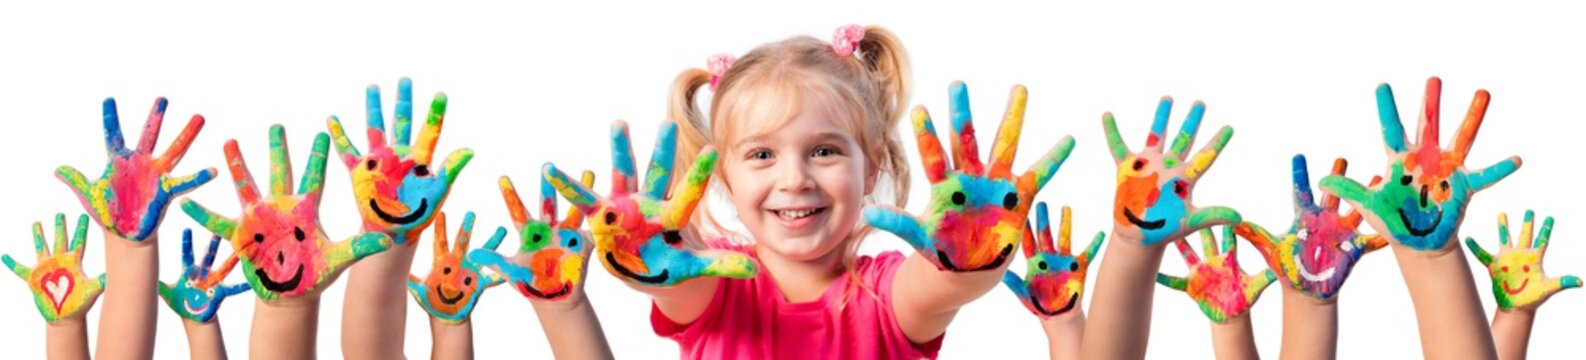 Children In Creativity - Hands Painted With Smiles
